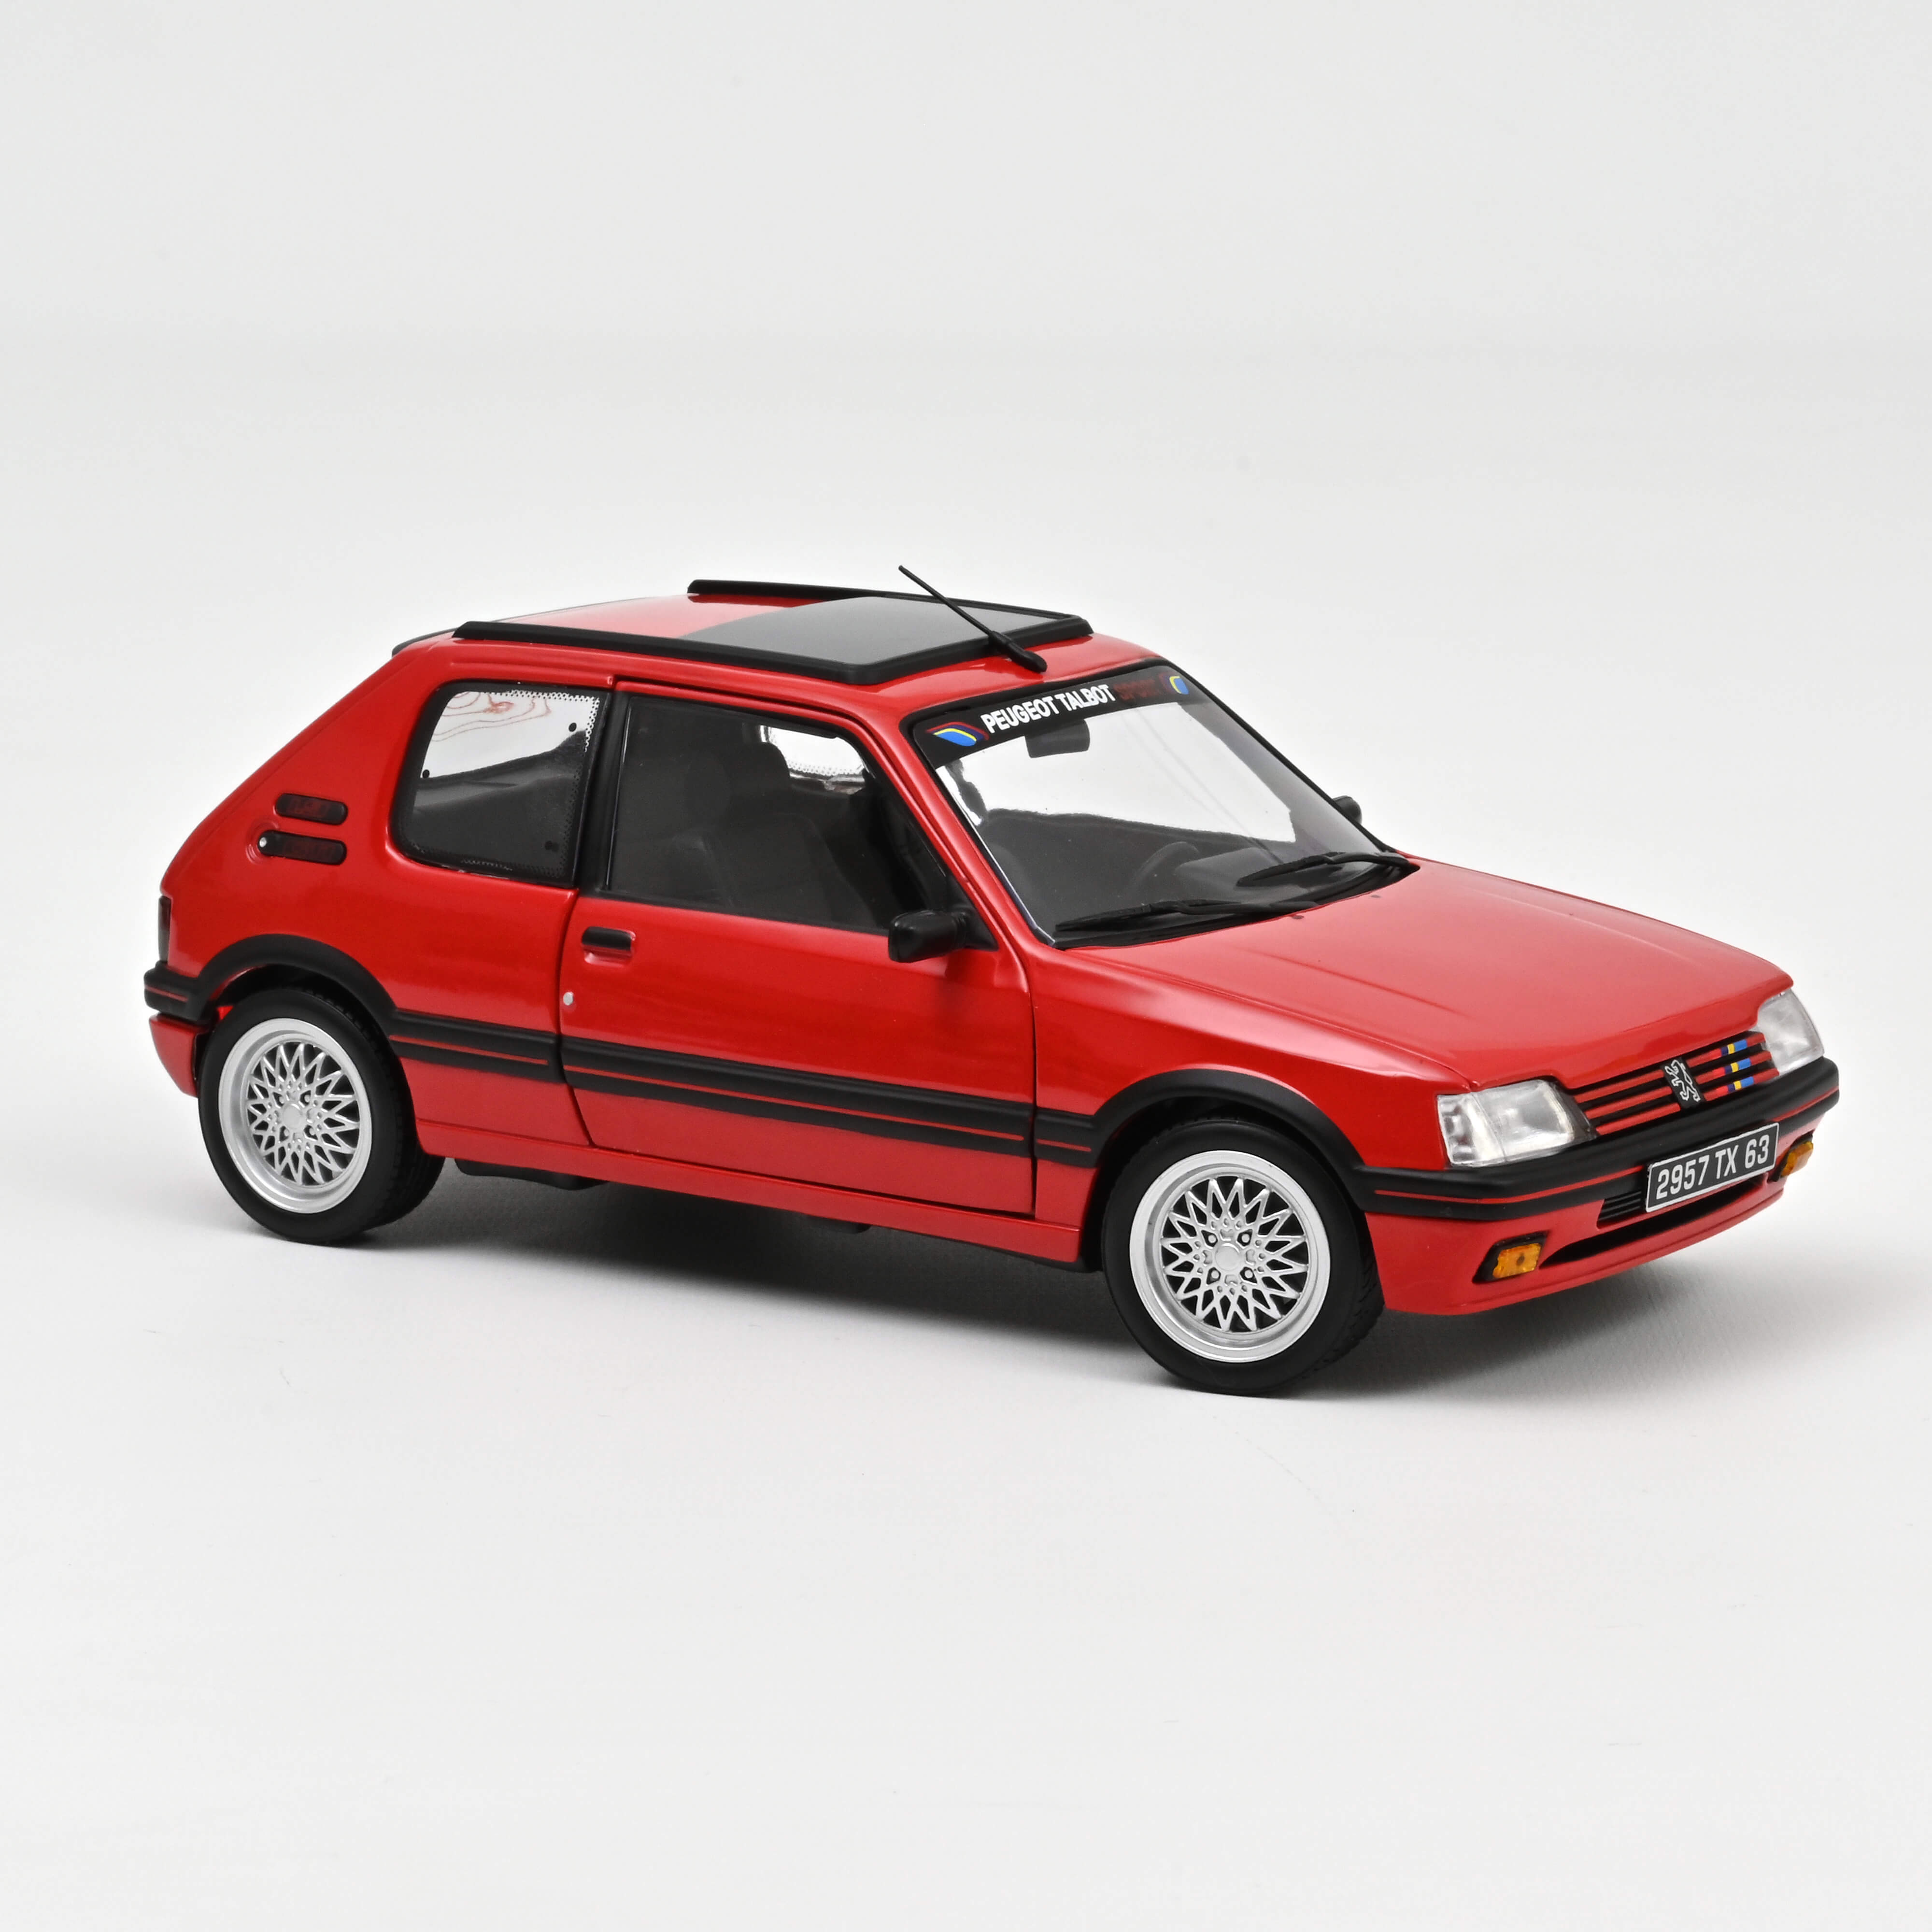 Peugeot 205 GTi 1.9 PTS rot PTS deco 1991 Vallelunga Red 1:18